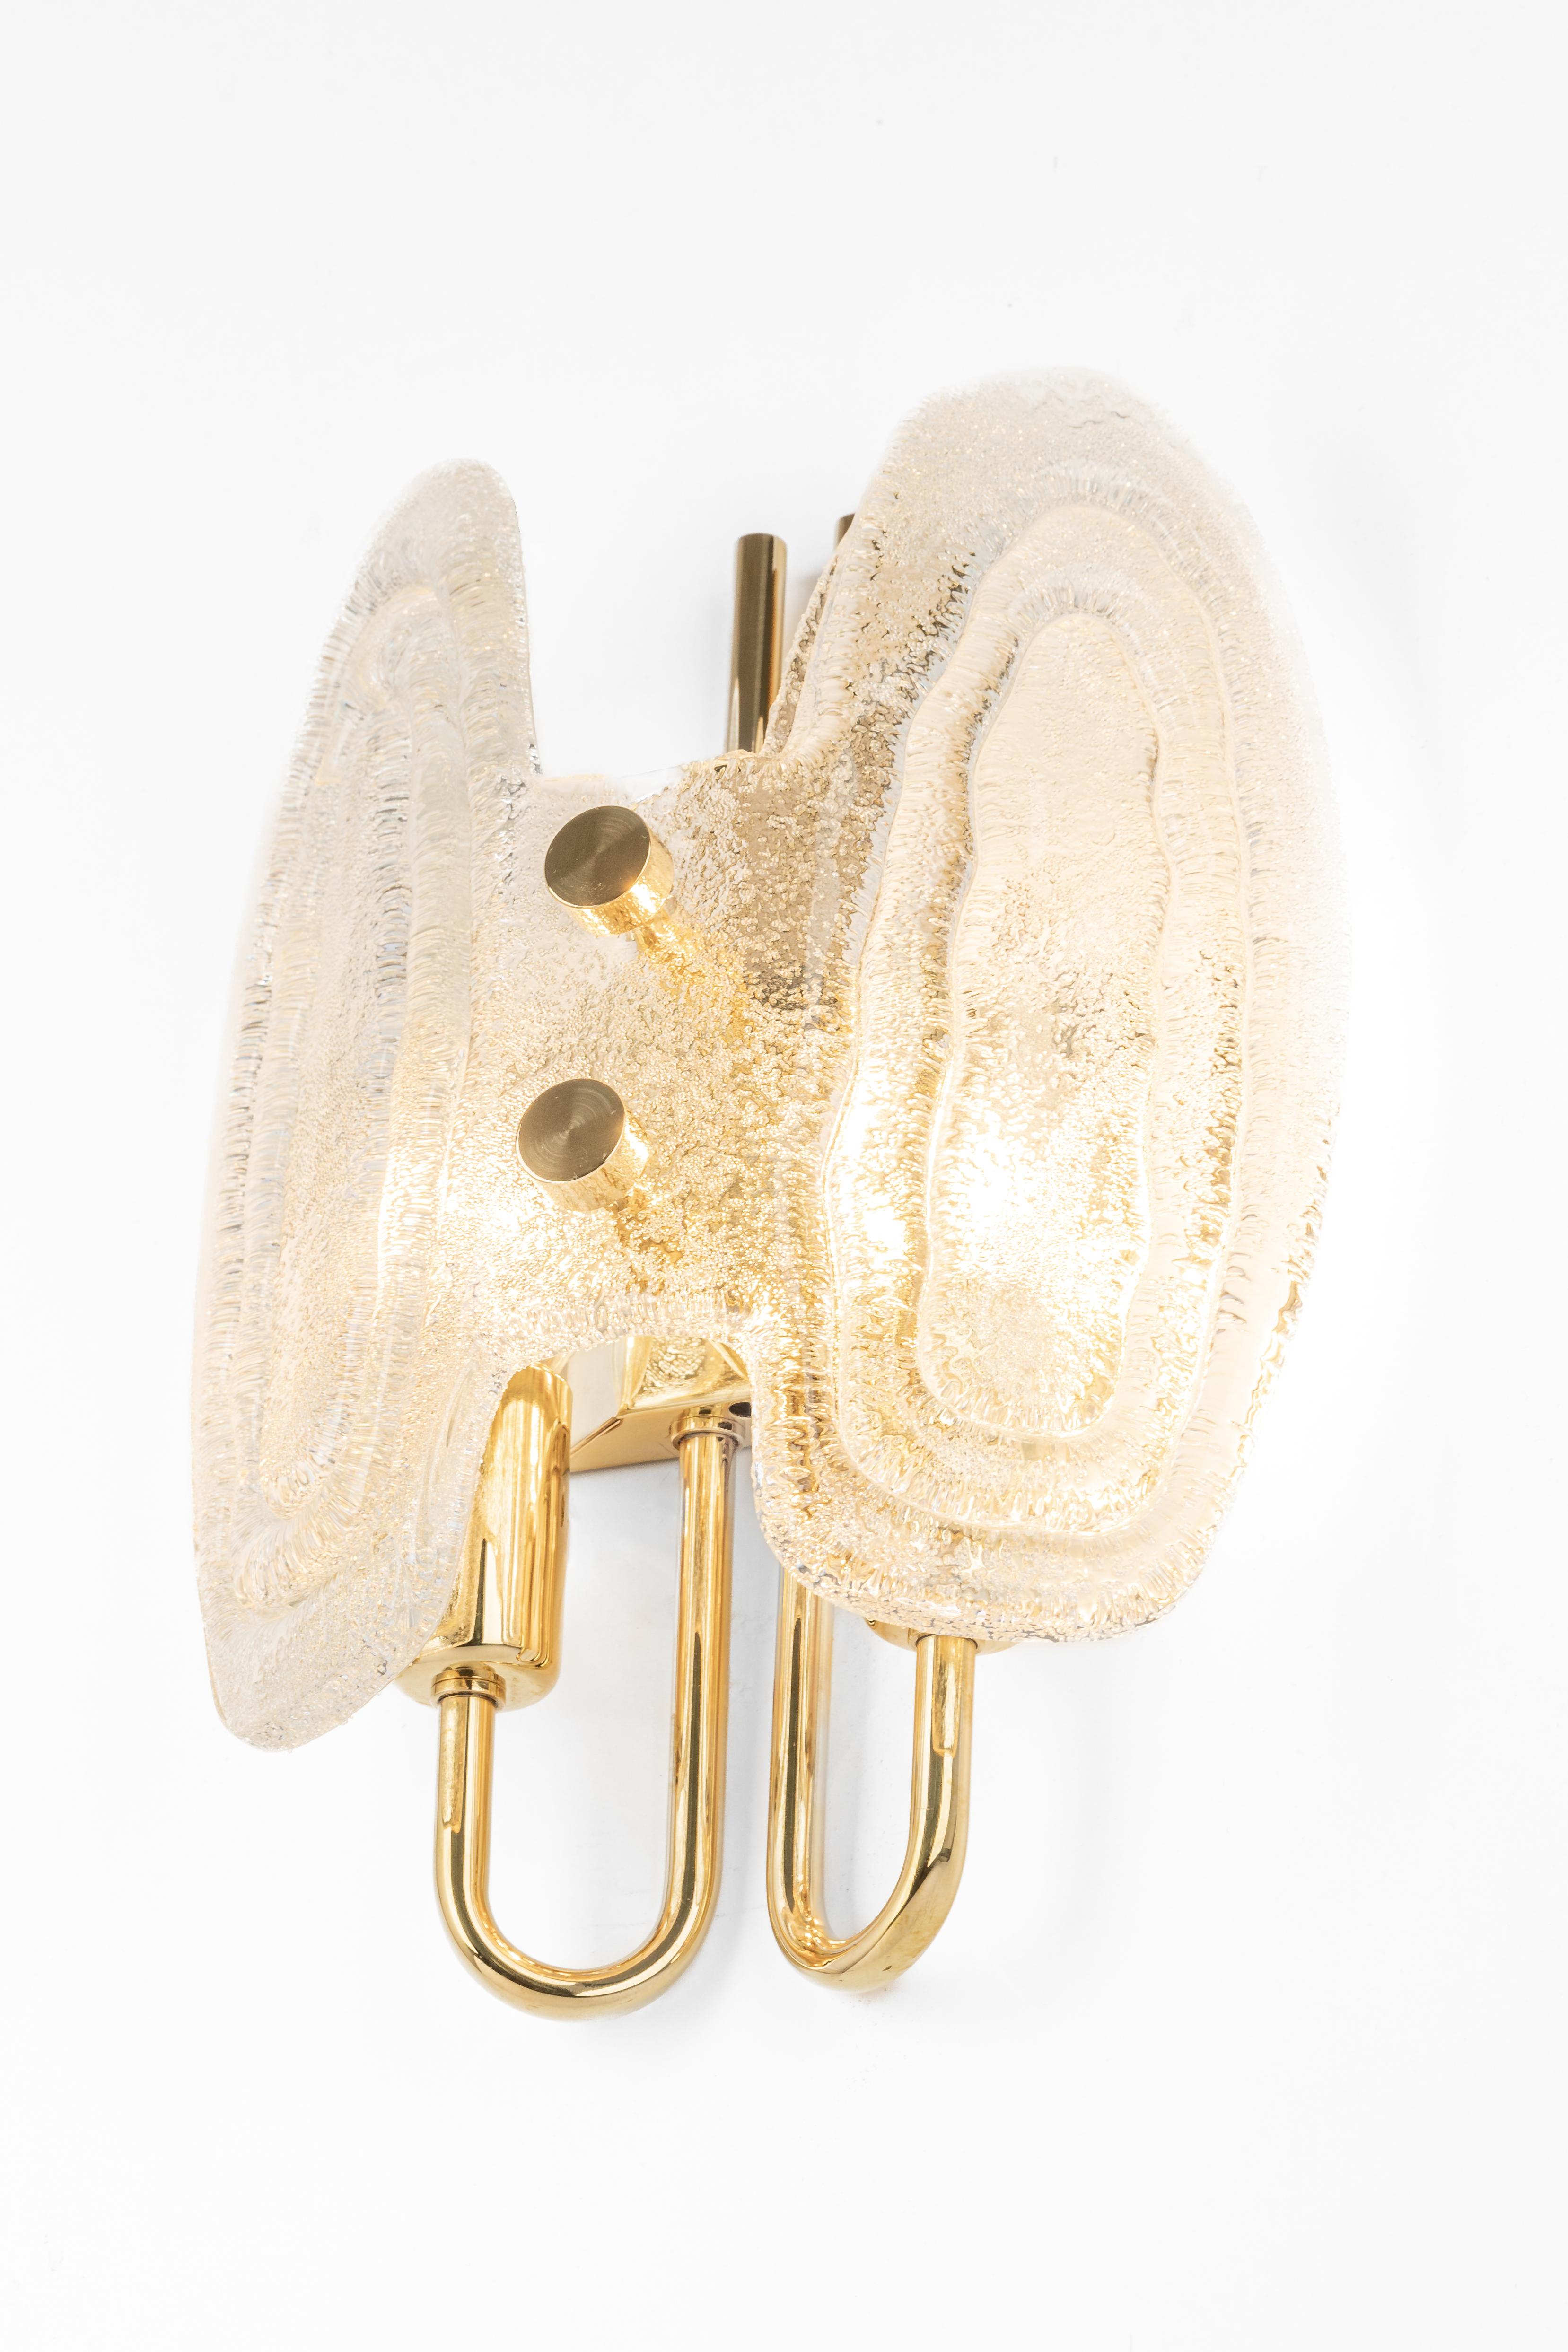 Pair of Murano Ice Glass Brass Sconces by Hillebrand, Germany, 1970s For Sale 3